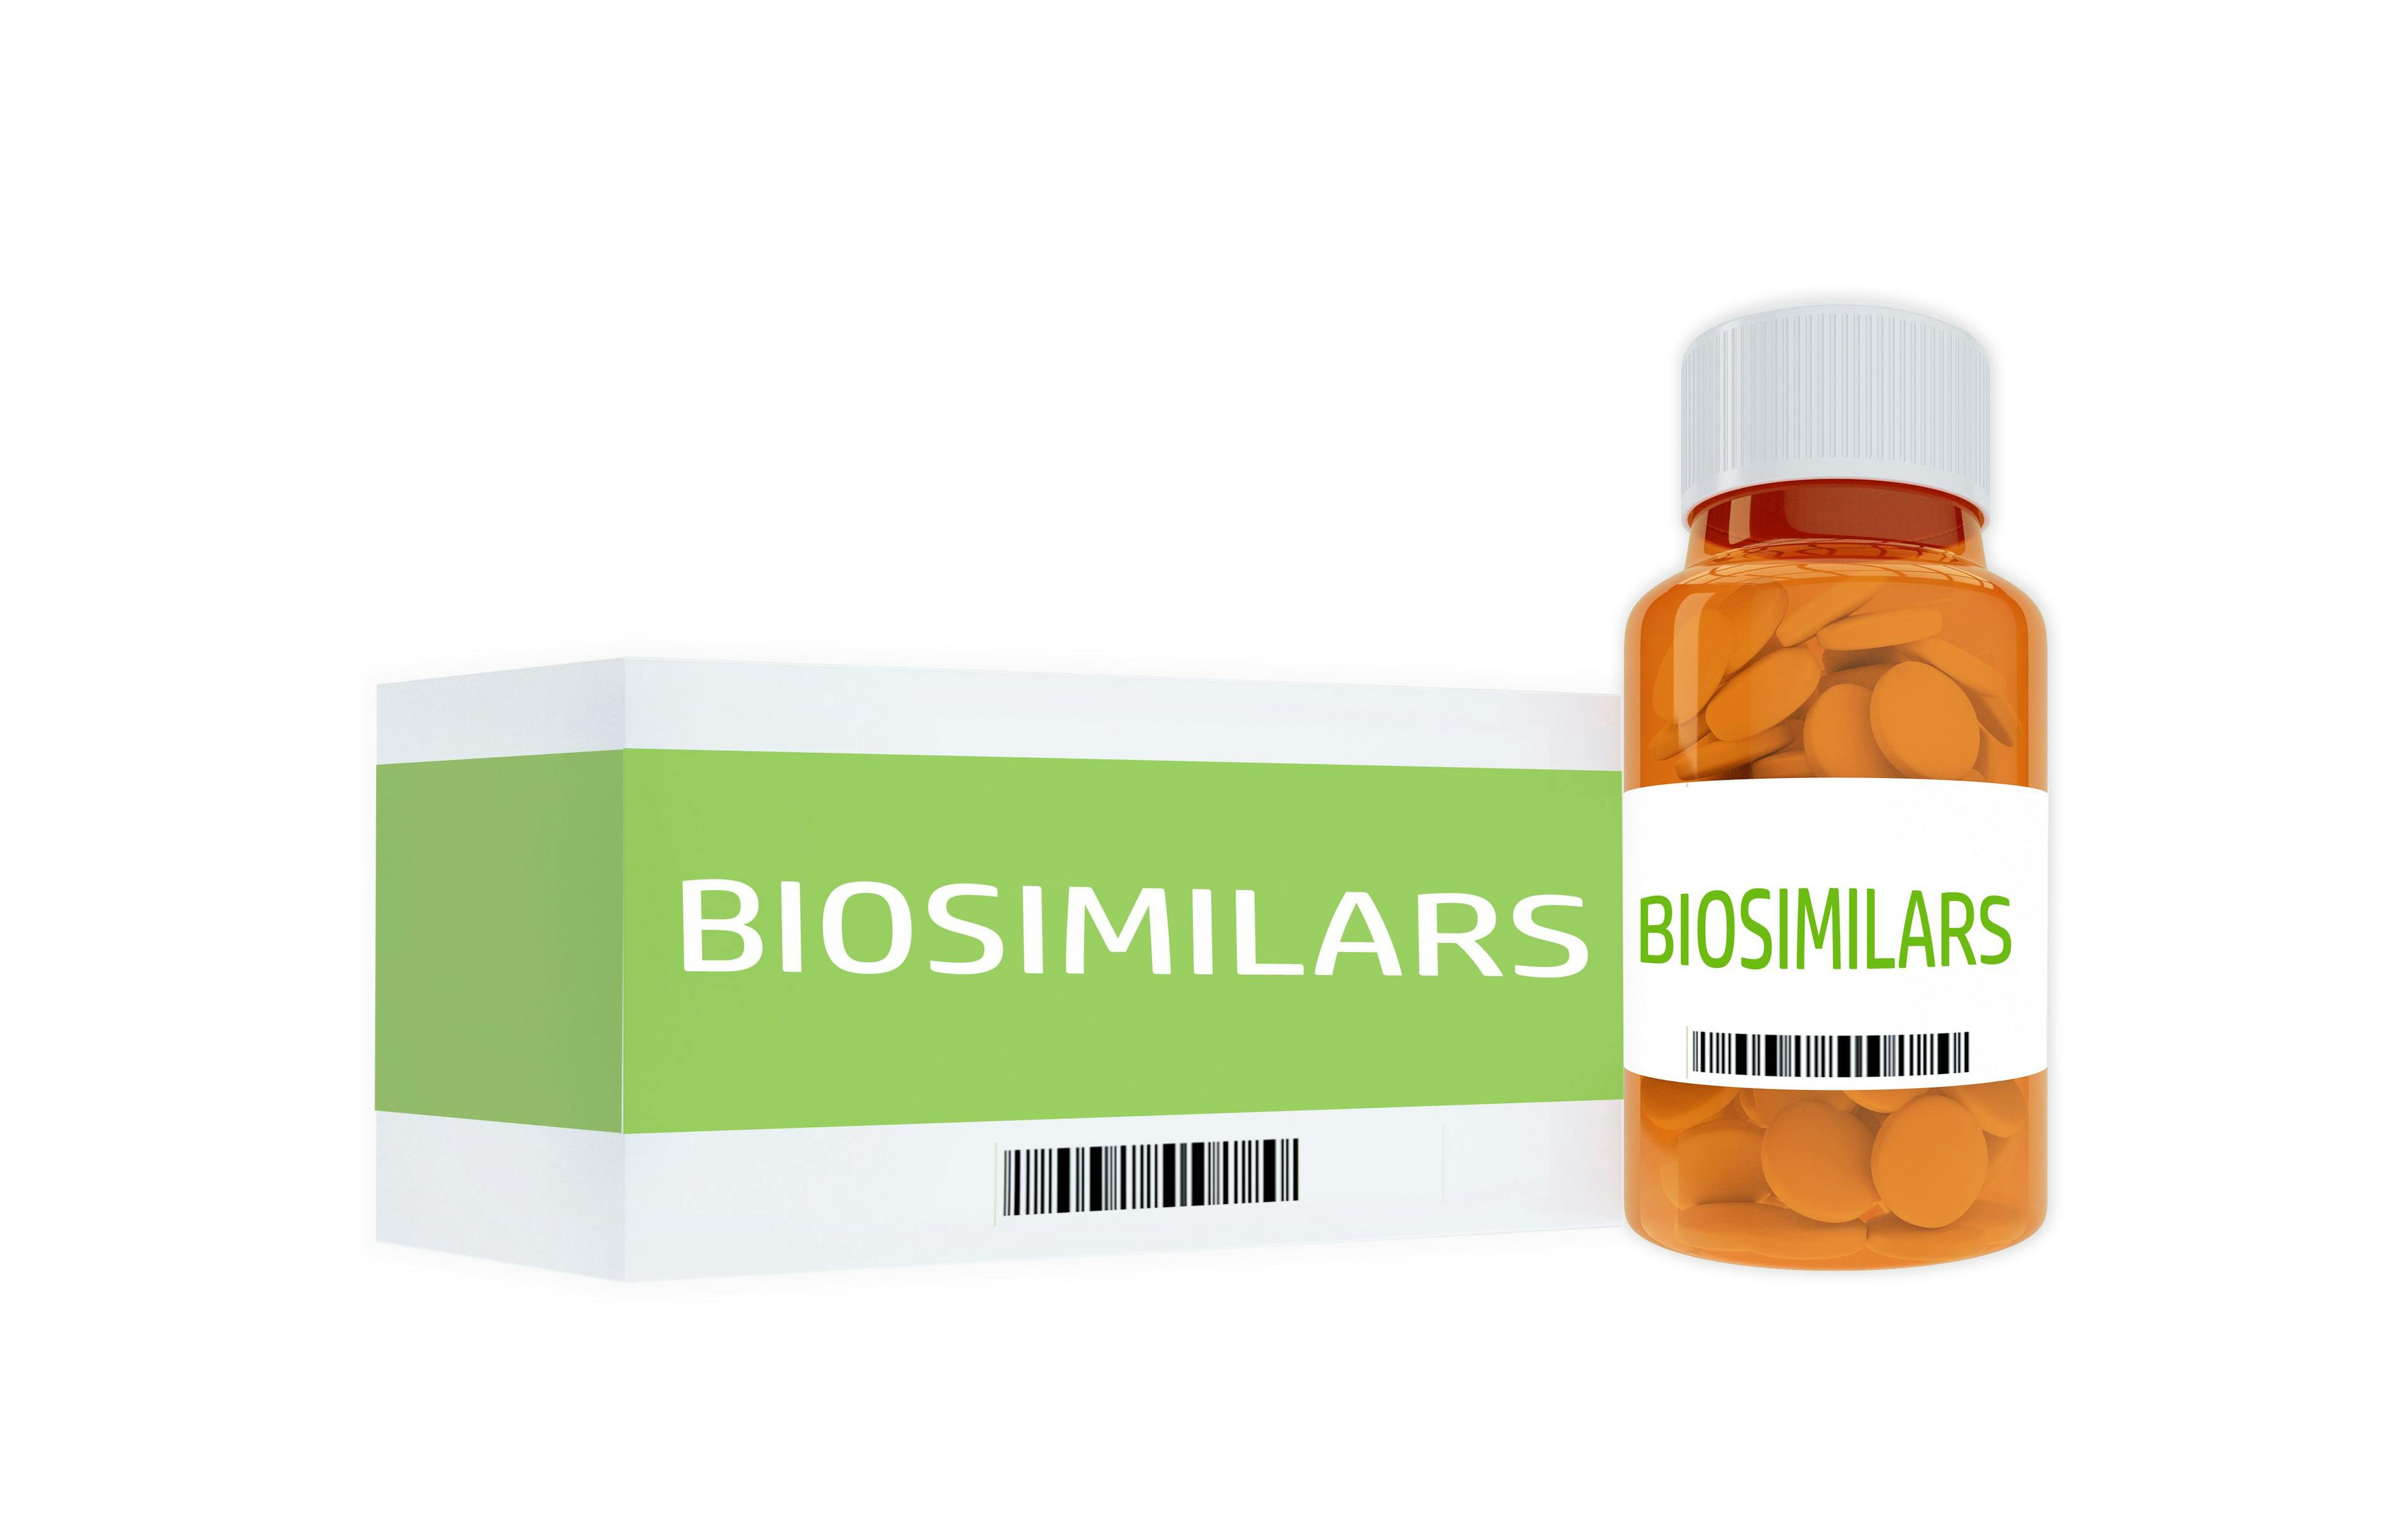 In Order to Maintain the Industry, the Status Quo for Biosimilars Needs to Change